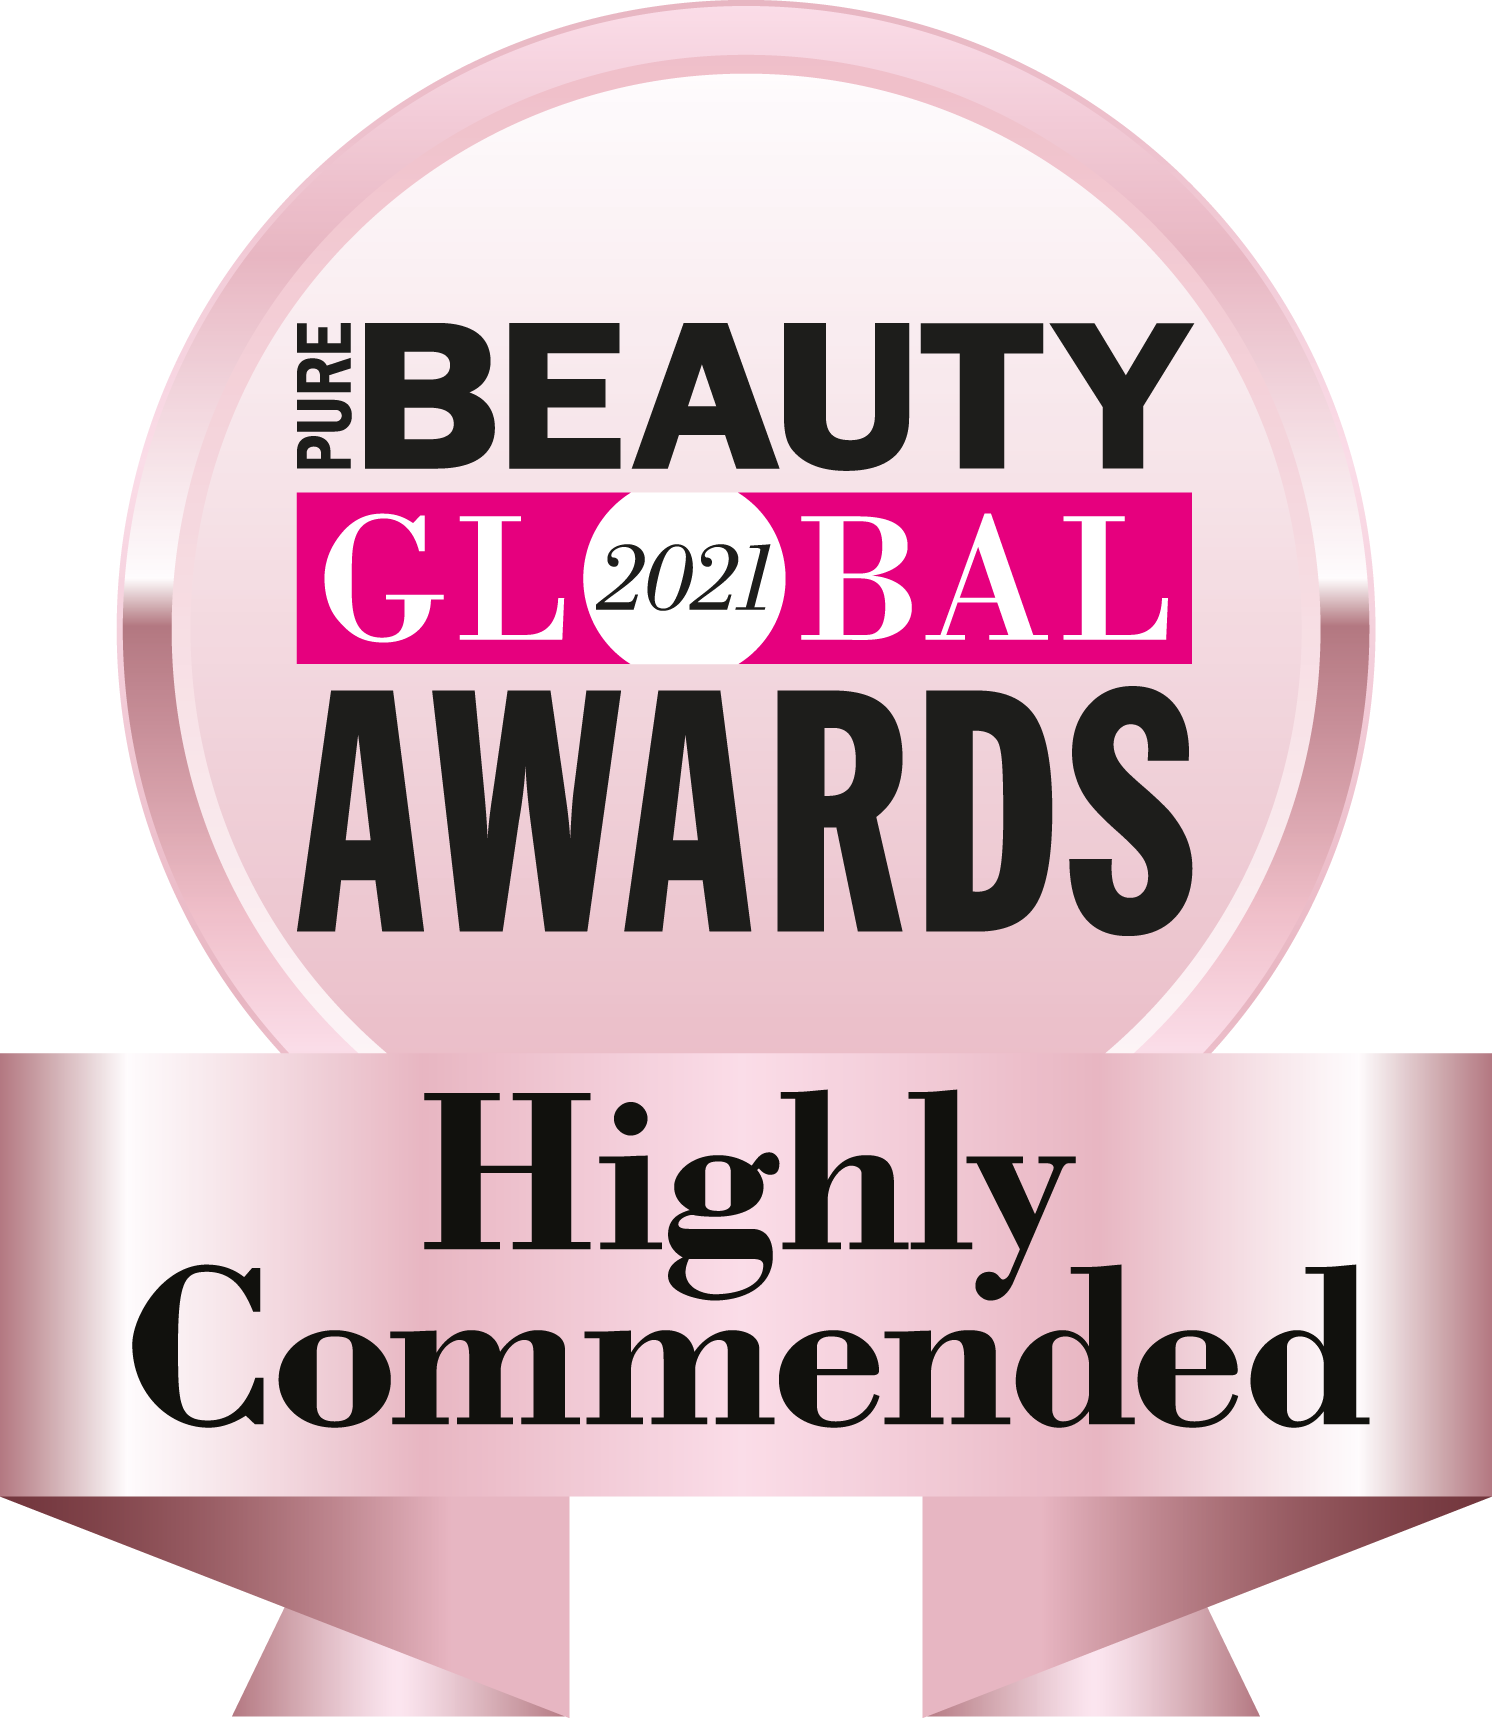 Beauty Global Awards 2021 - Highly Commended